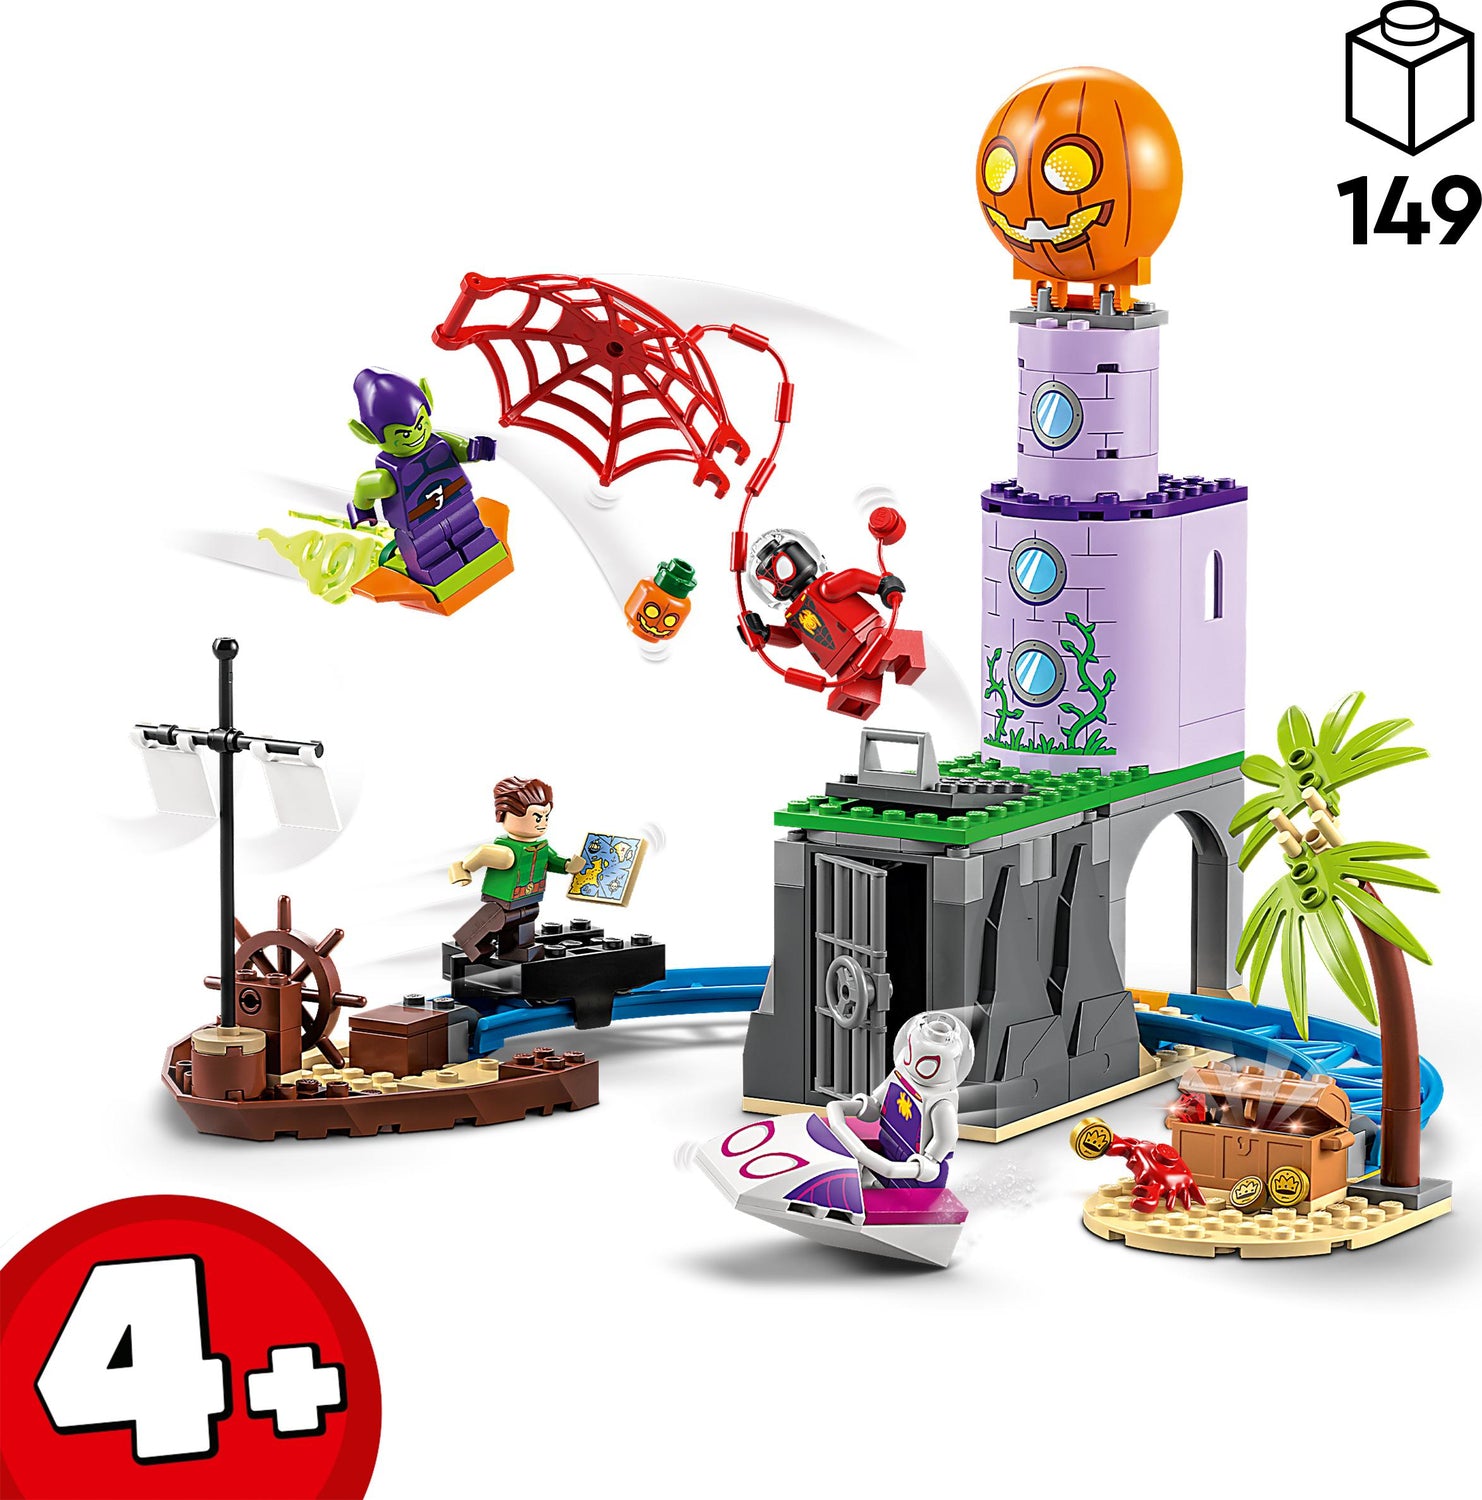 LEGO® Marvel Super Heroes Team Spidey at Green Goblin&#39;s Lighthouse